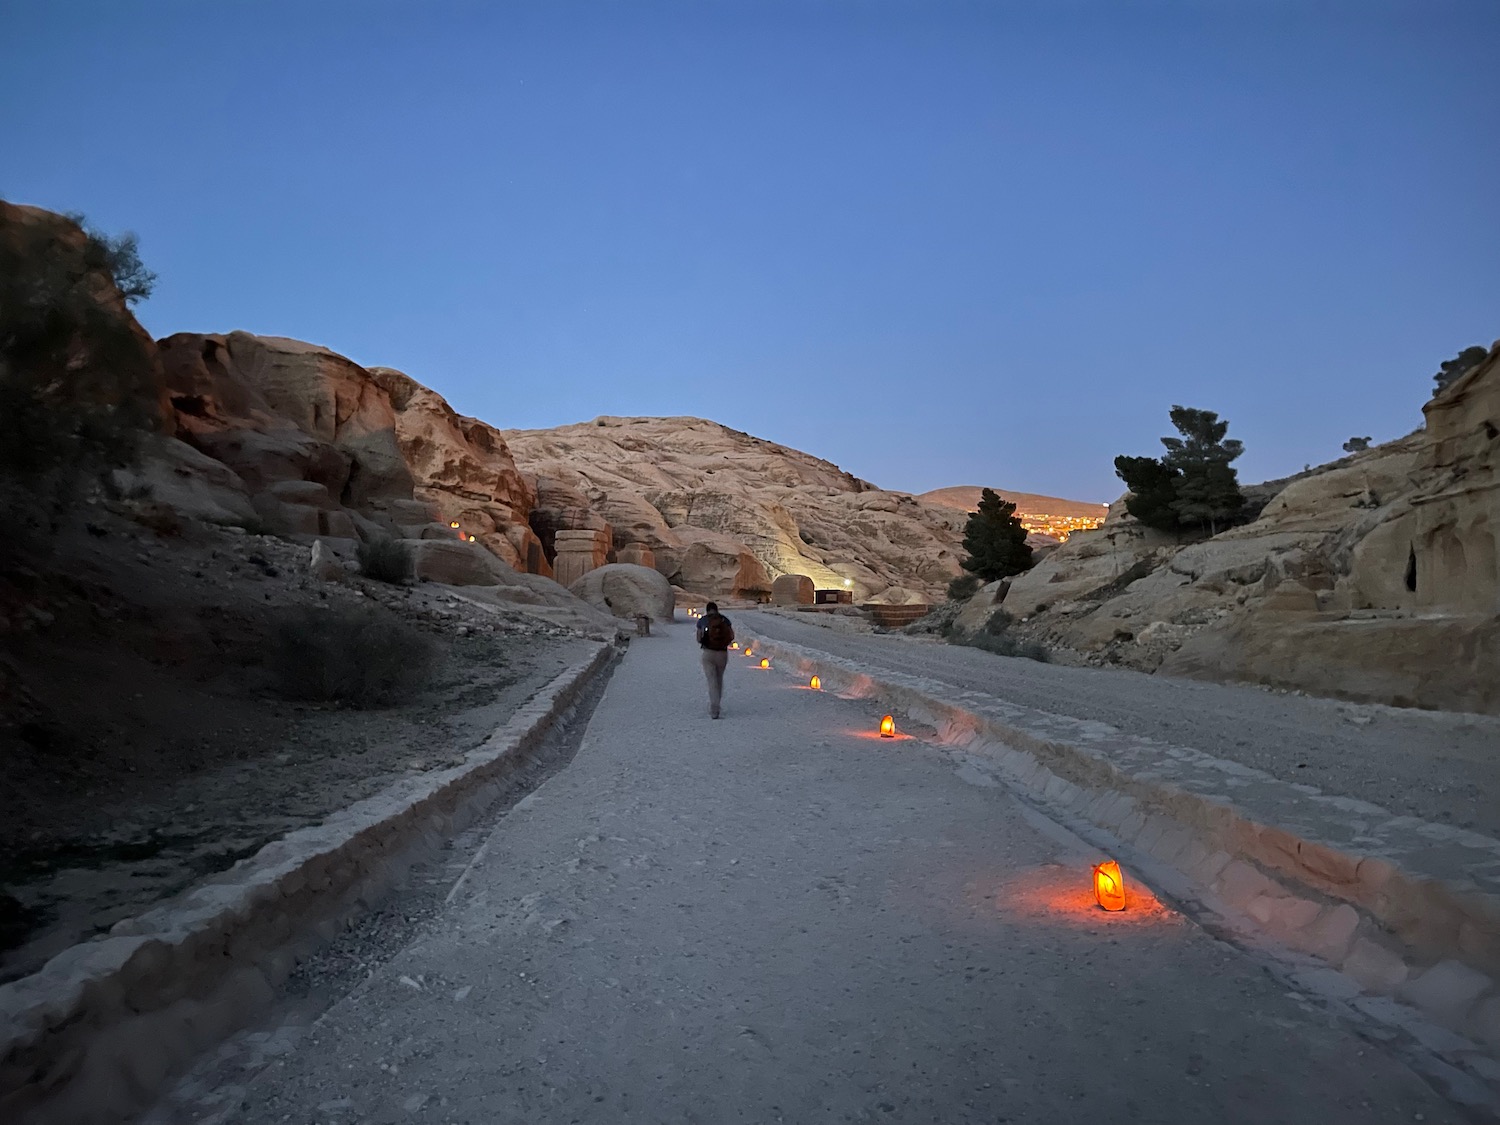 a person walking on a dirt road with lit candles